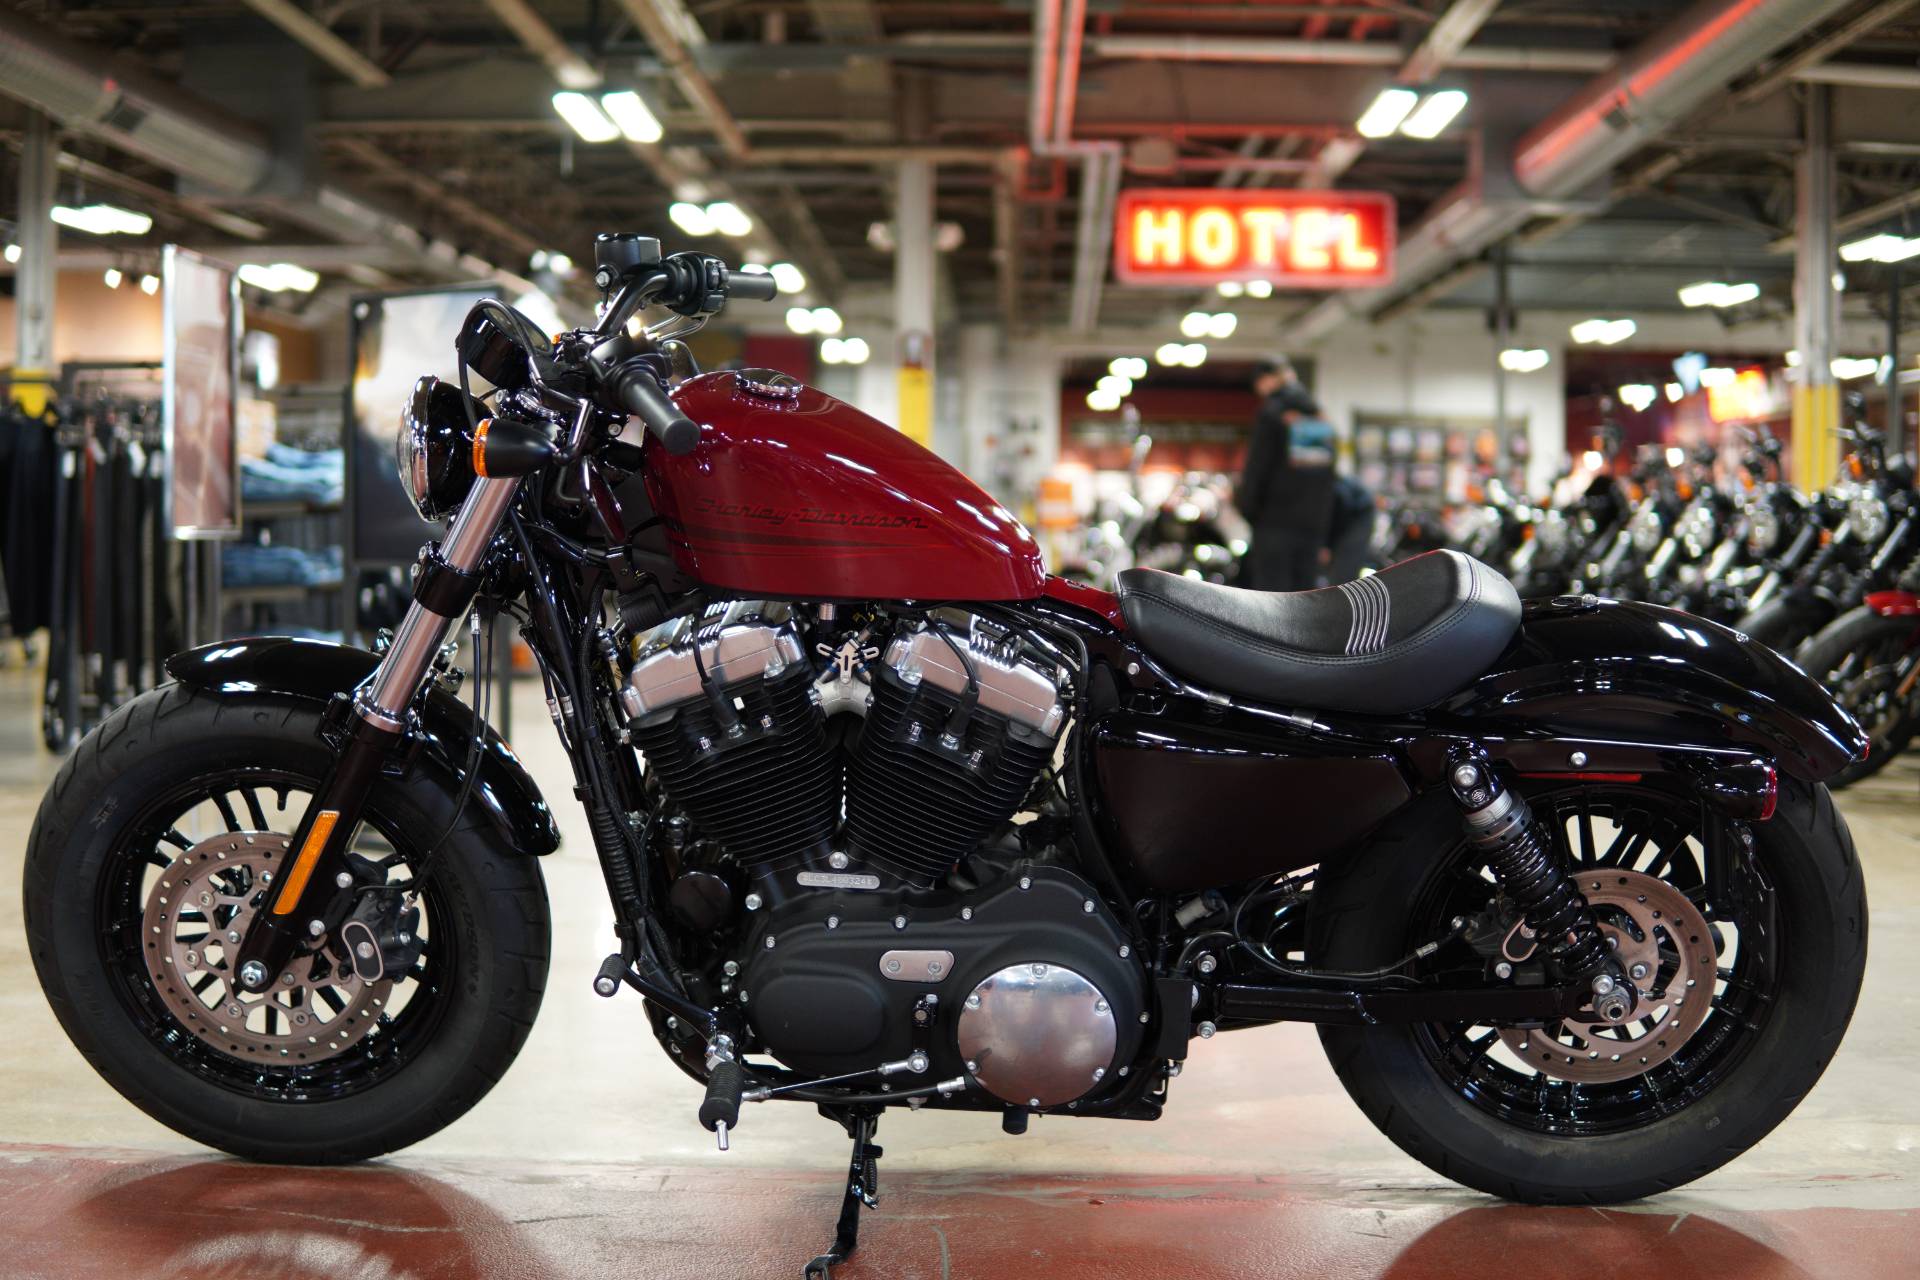 2020 Harley-Davidson Forty-Eight® in New London, Connecticut - Photo 5